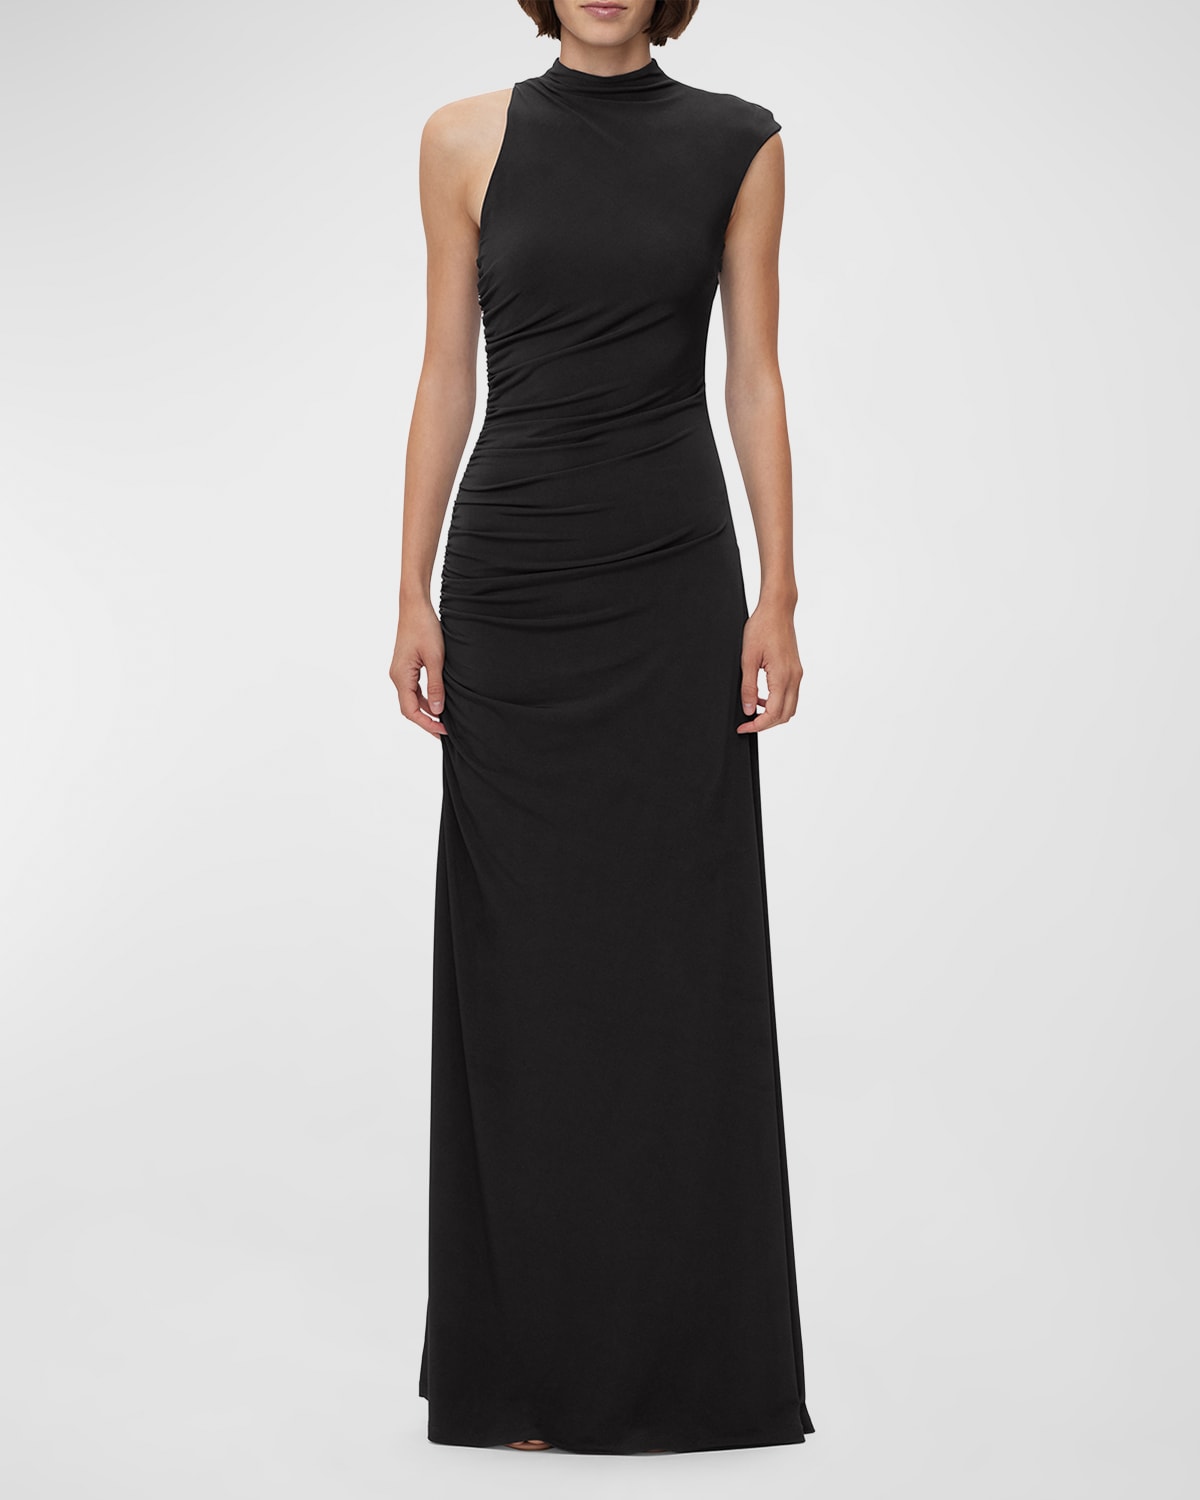 HERVE LEGER MOCK-NECK SLEEVELESS HARDWARE RUCHED JERSEY GOWN